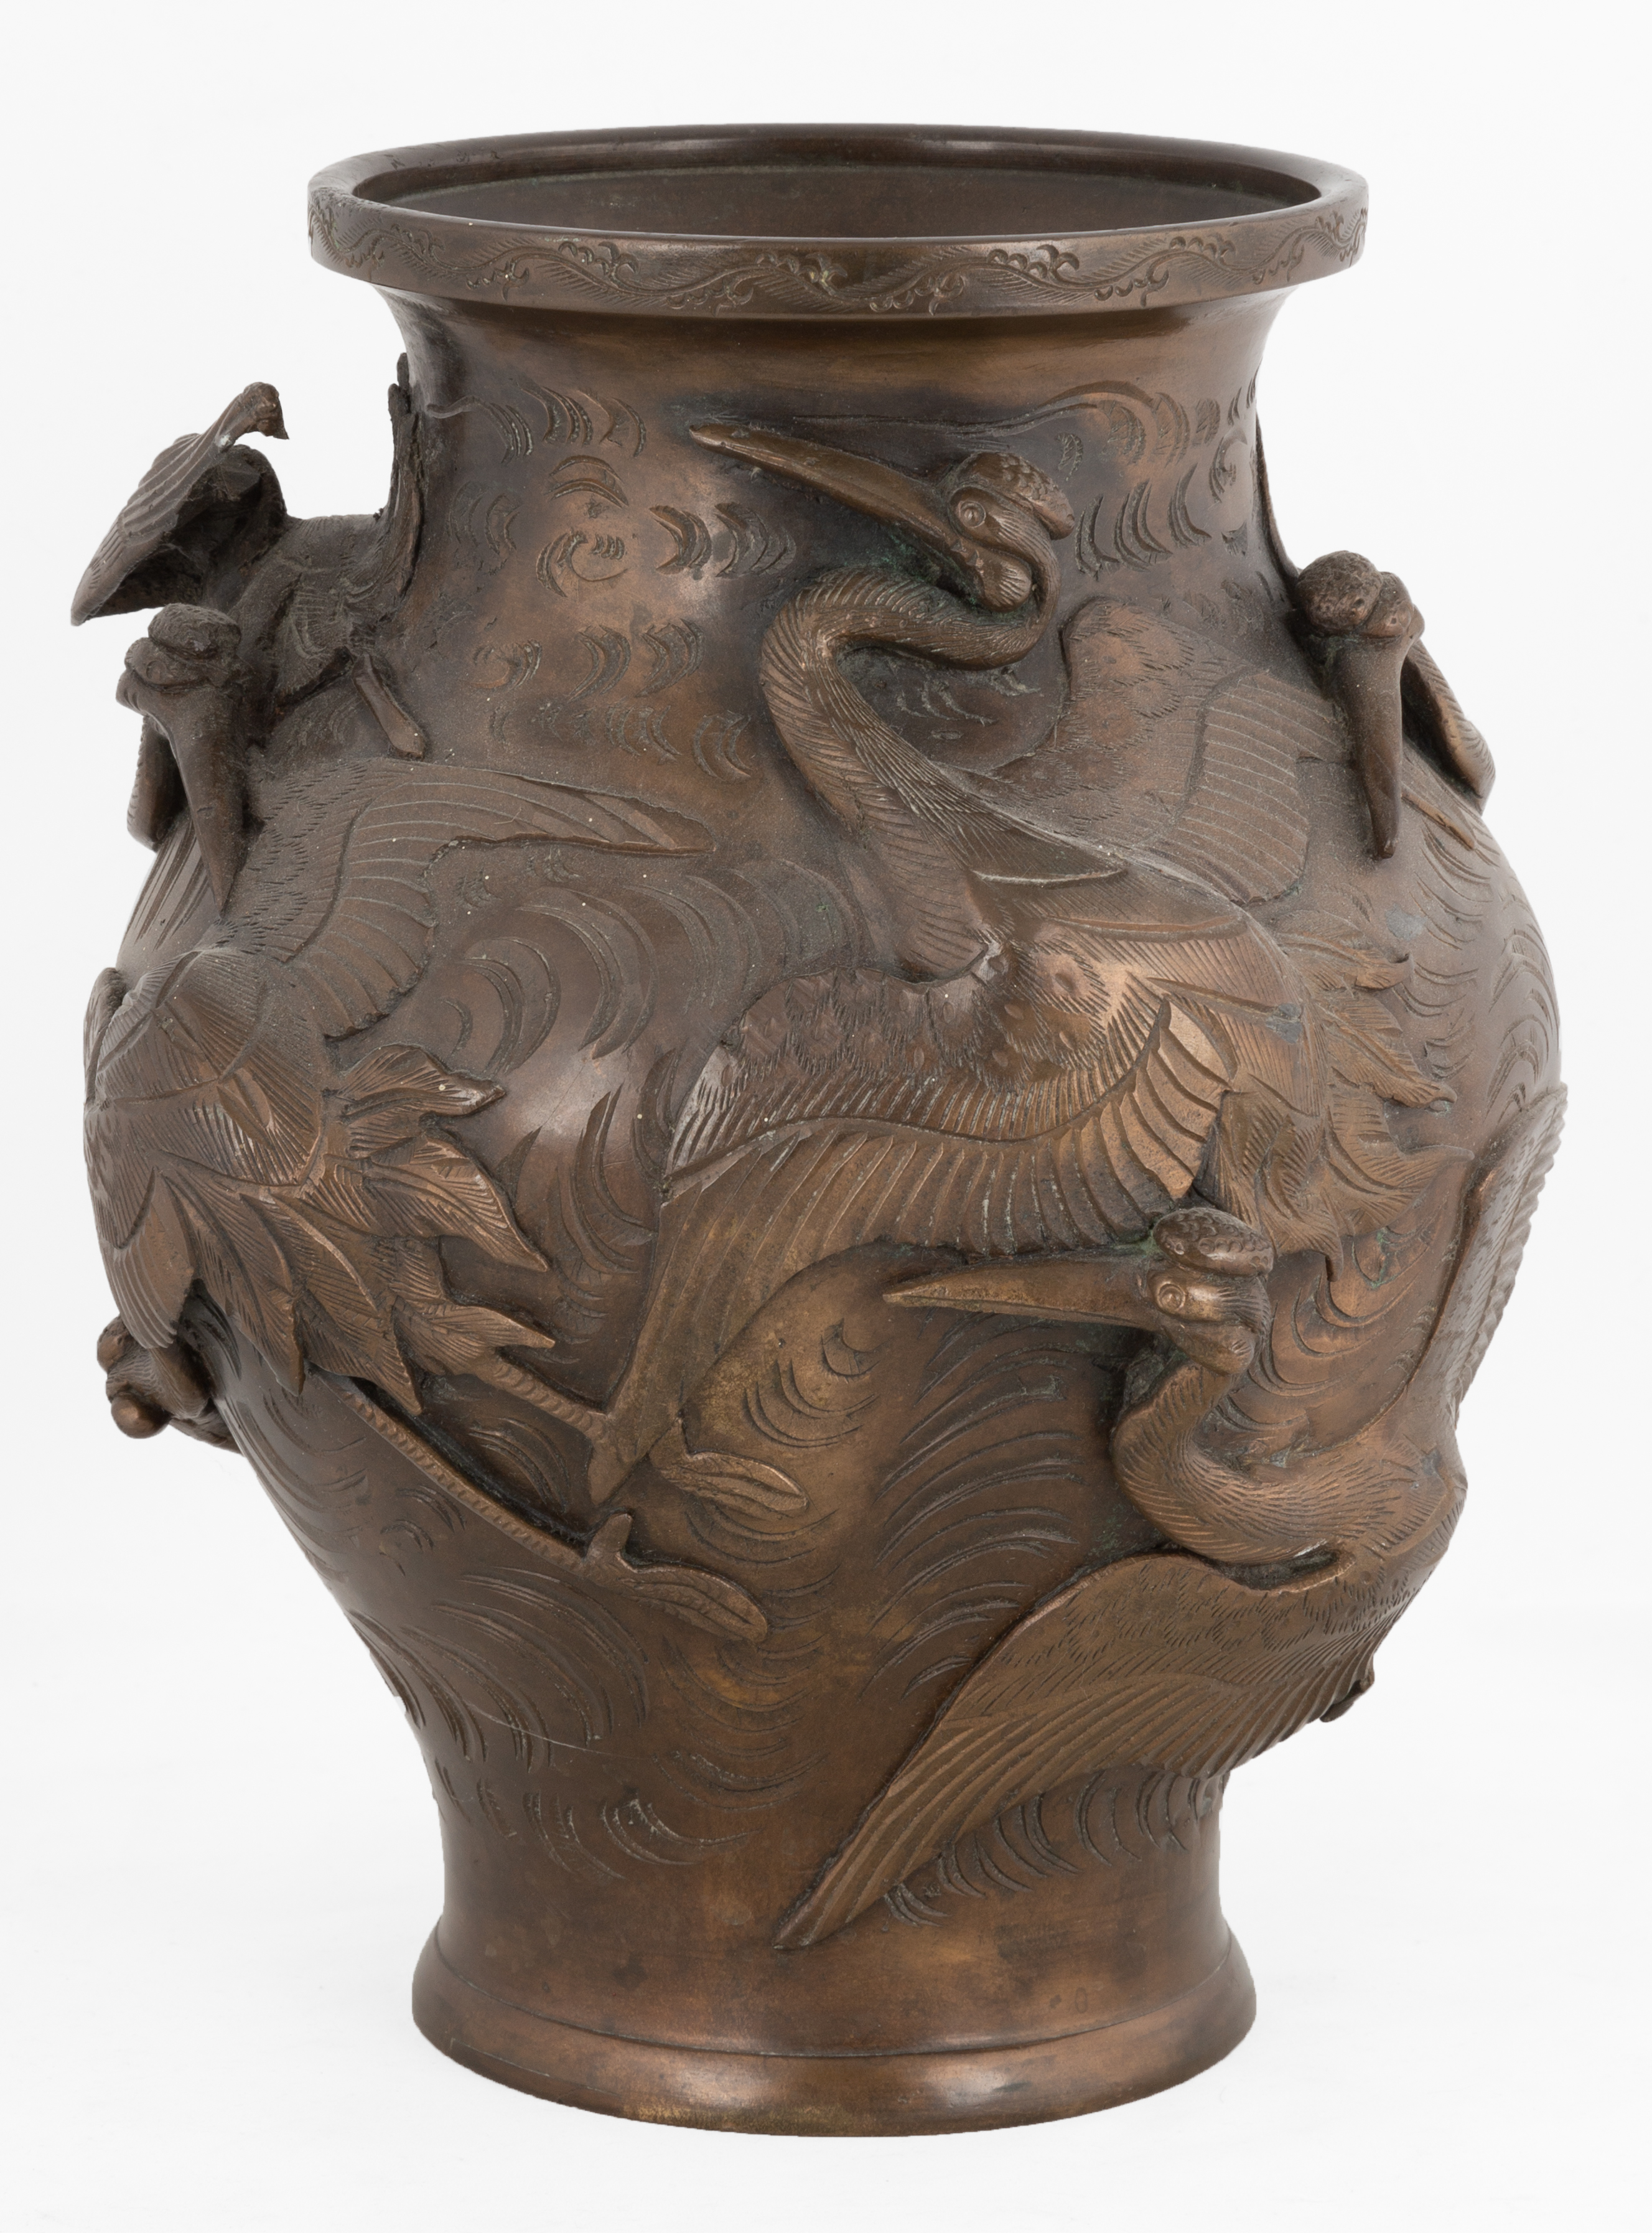 CHINESE BRONZE VASE Decorated with